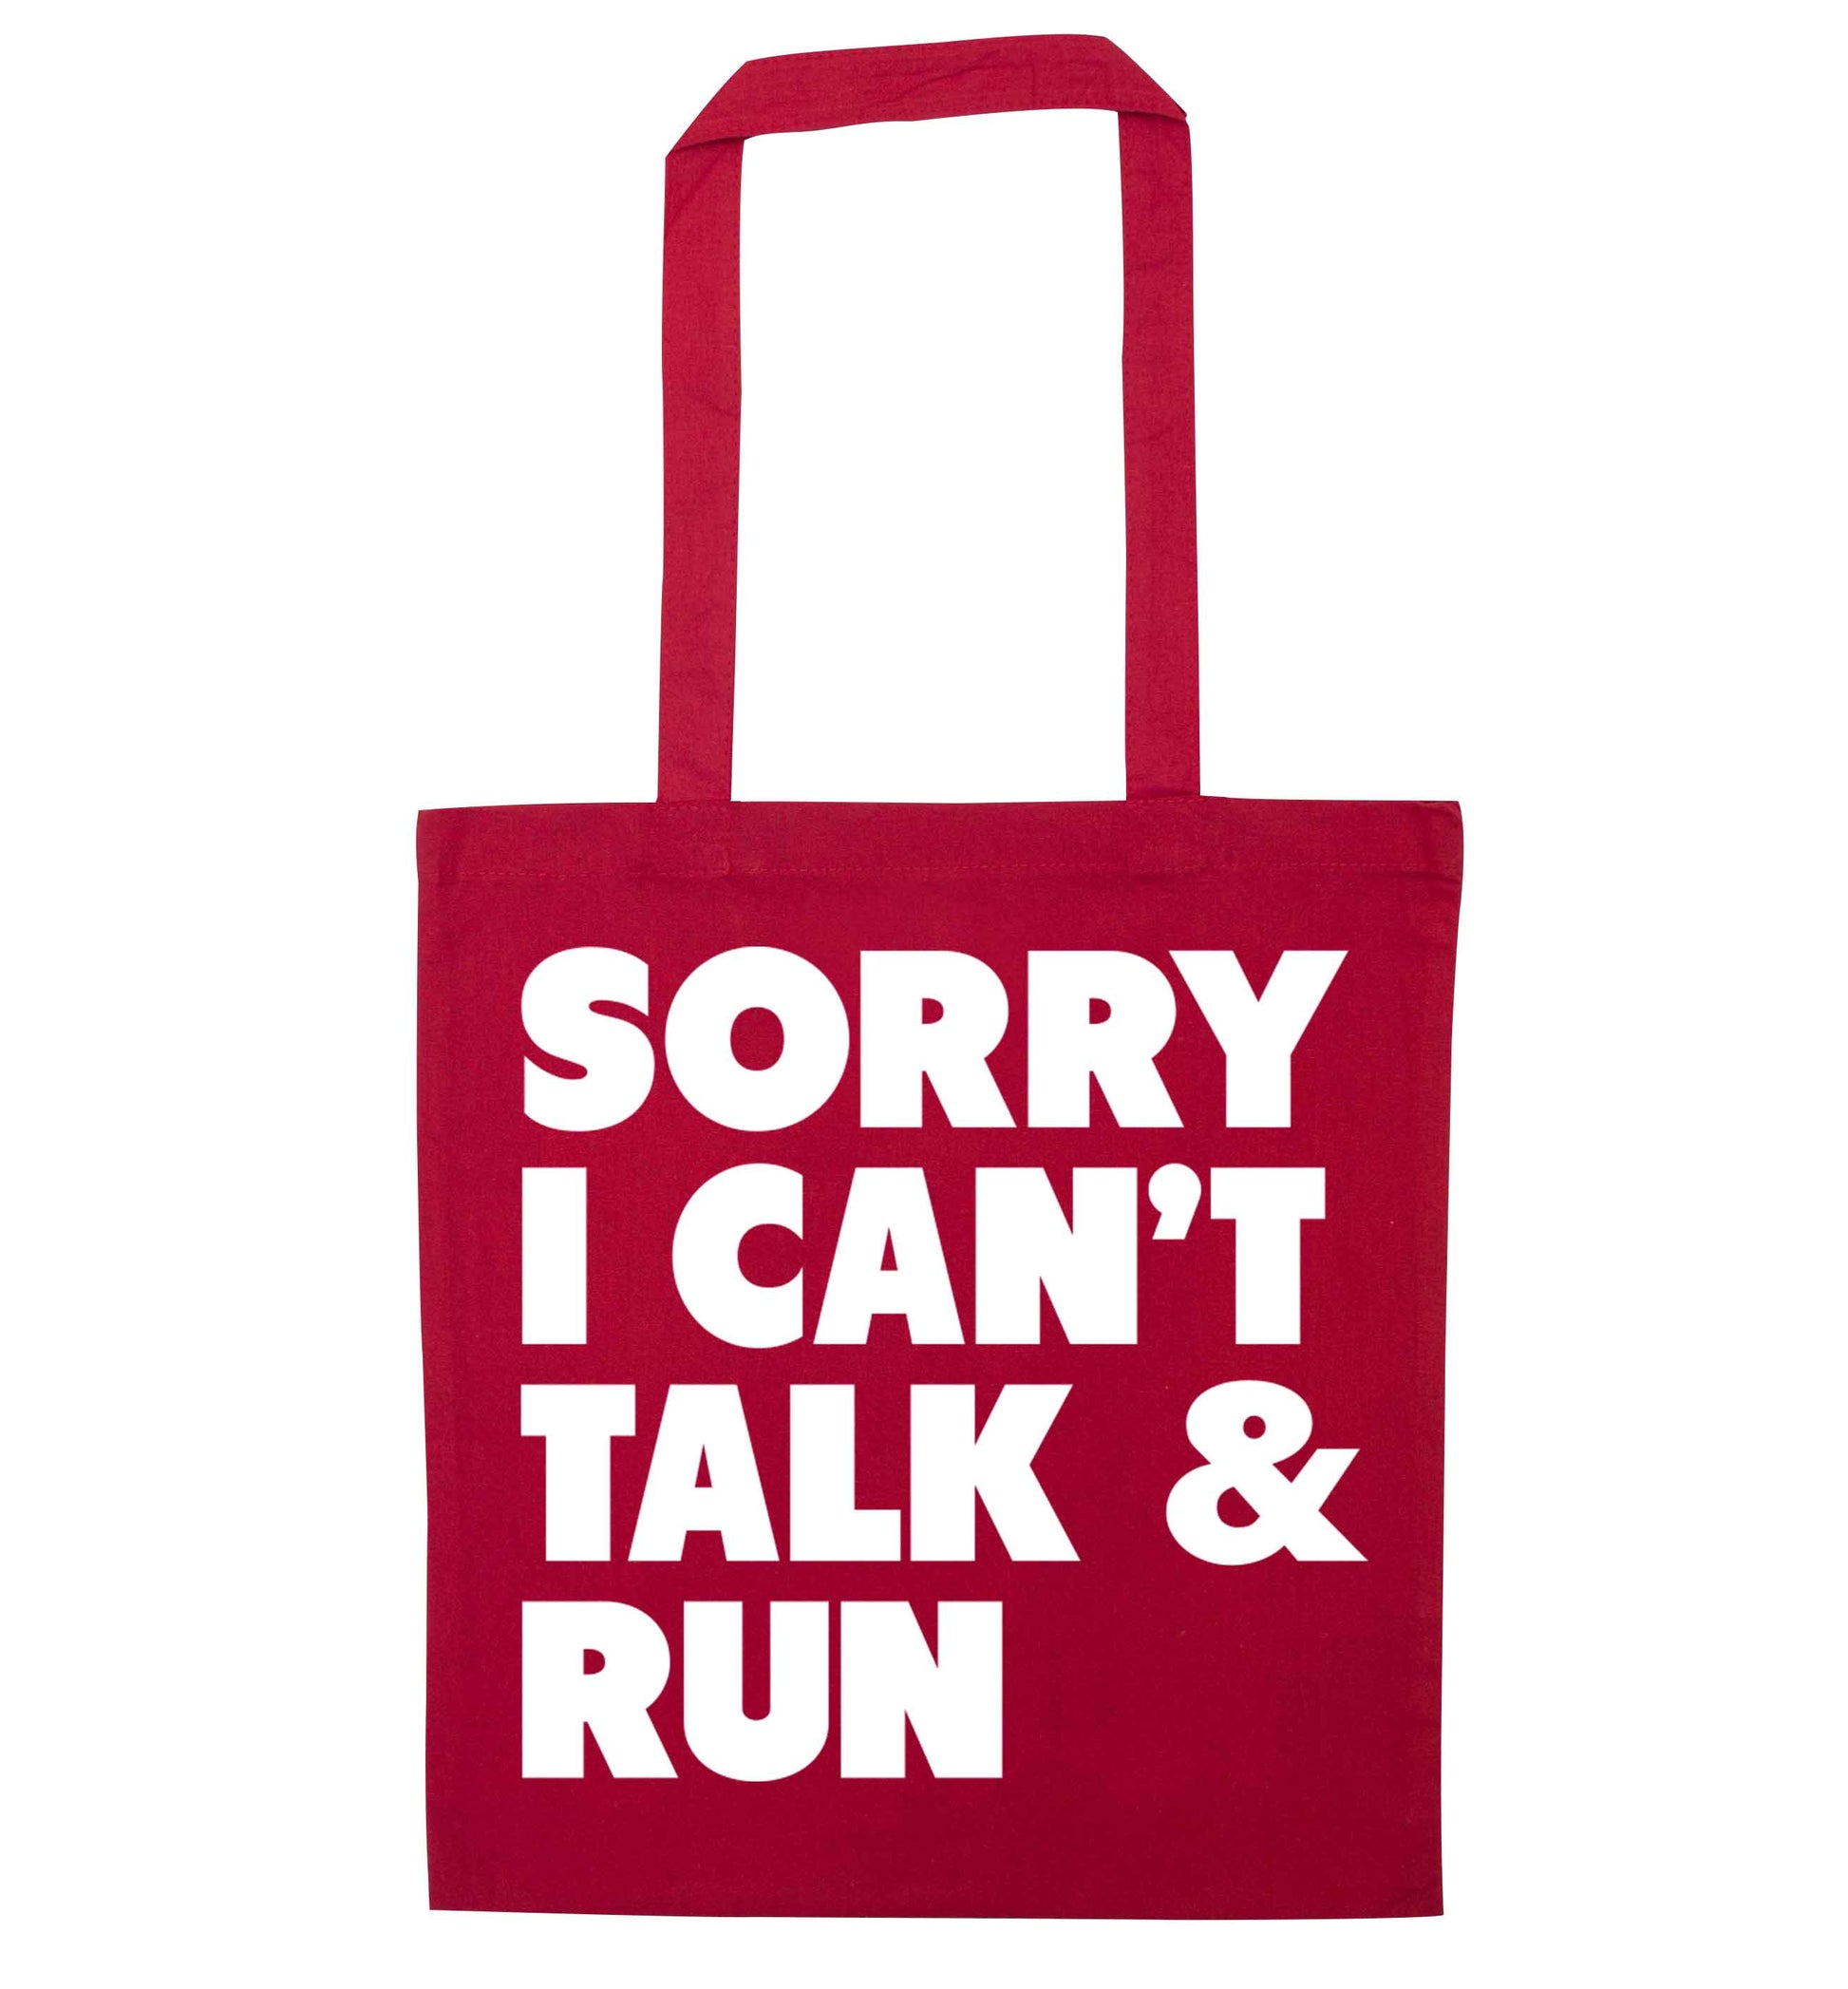 Sorry I can't talk and run red tote bag